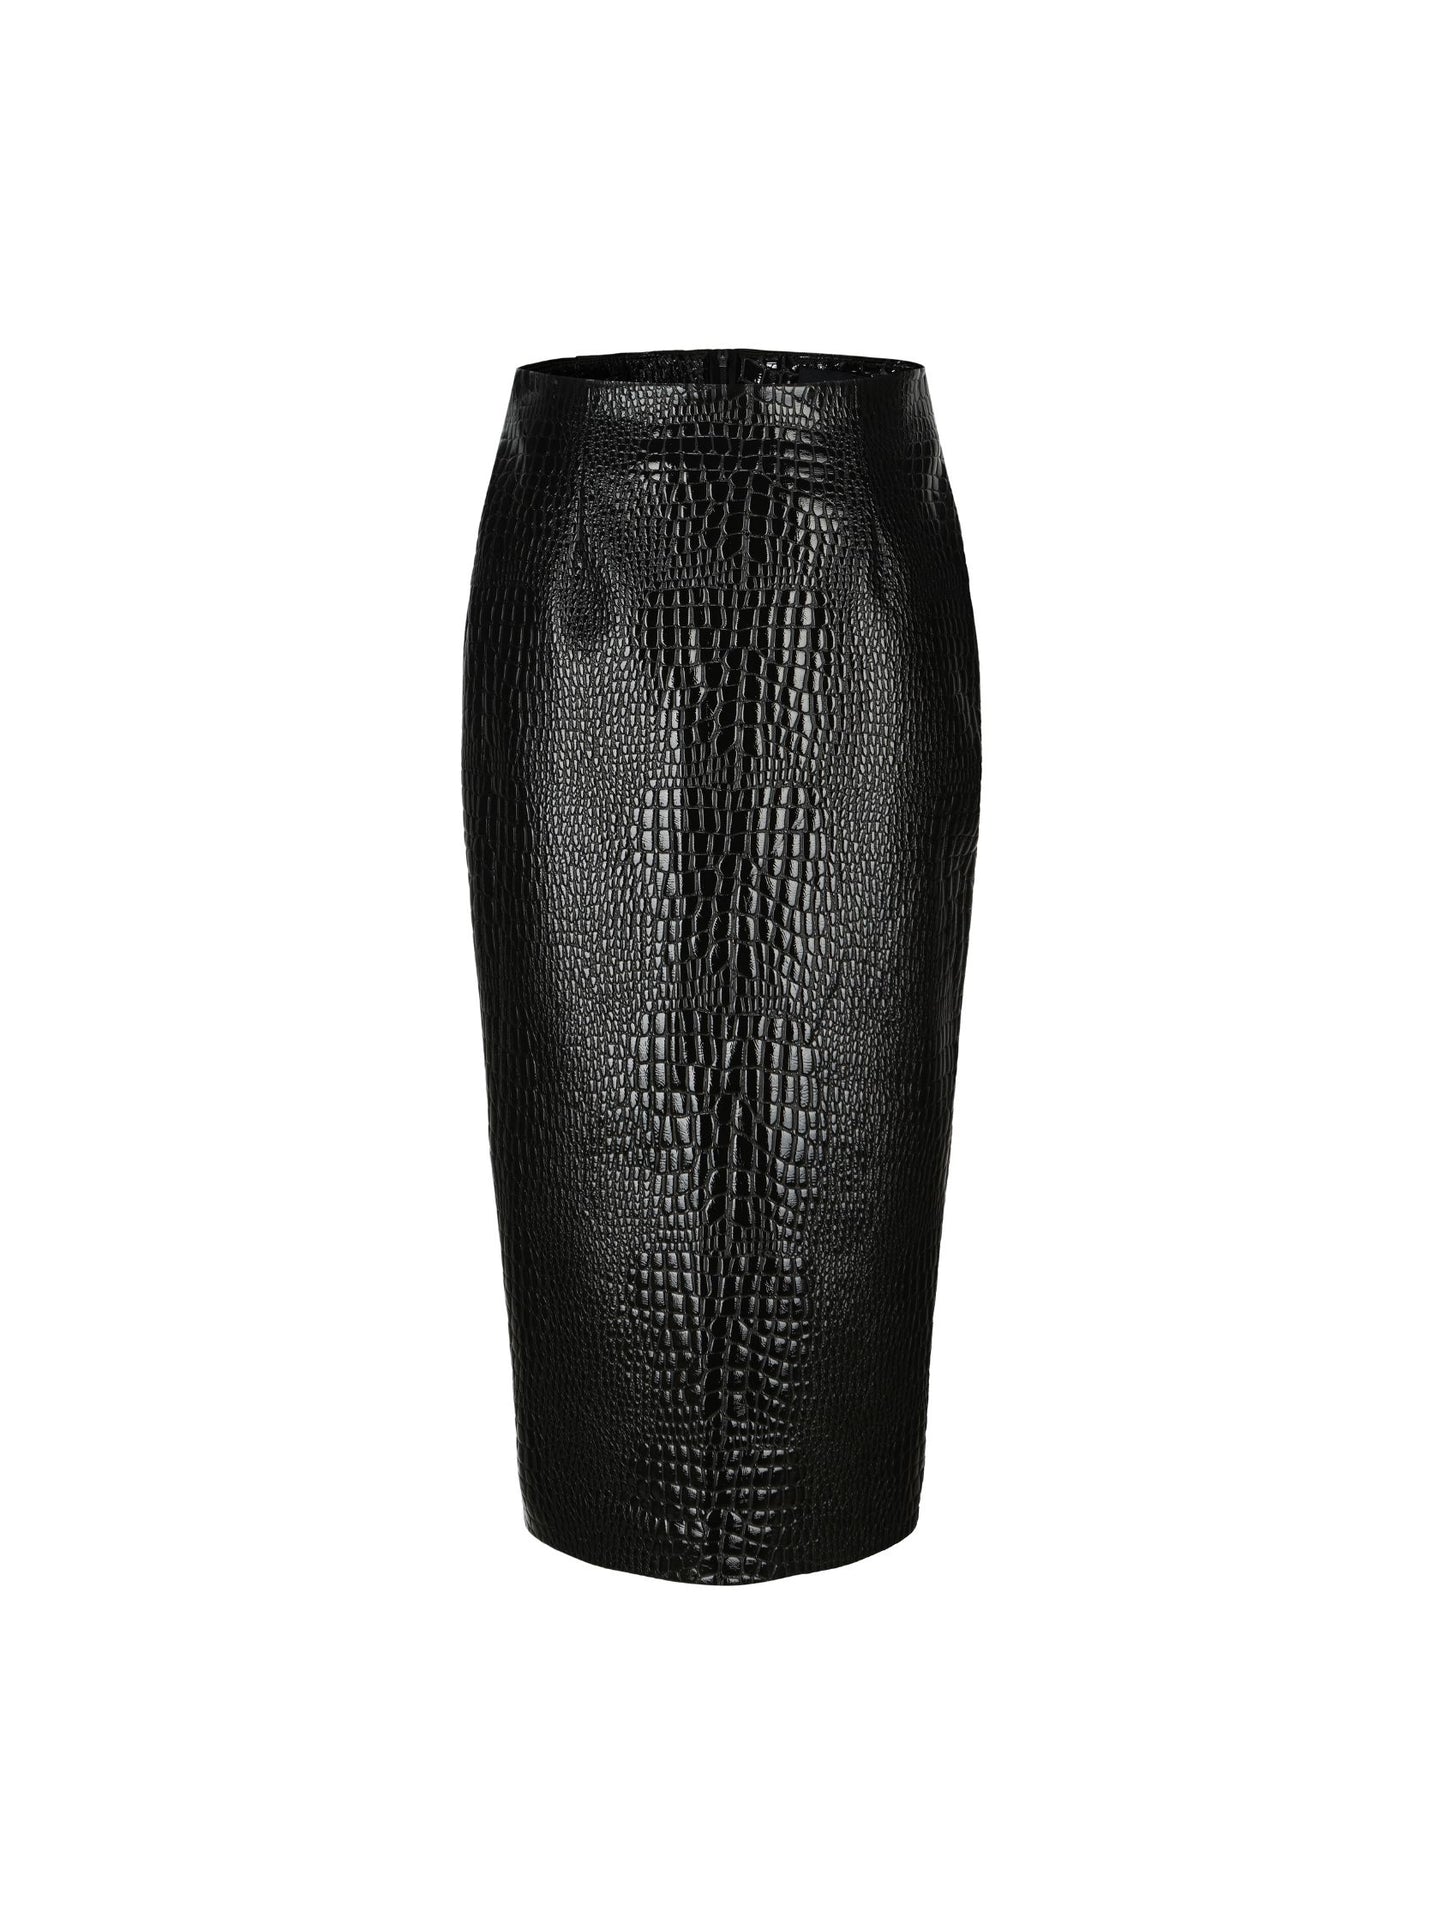 Brittany Leather Skirt (Final Sale)